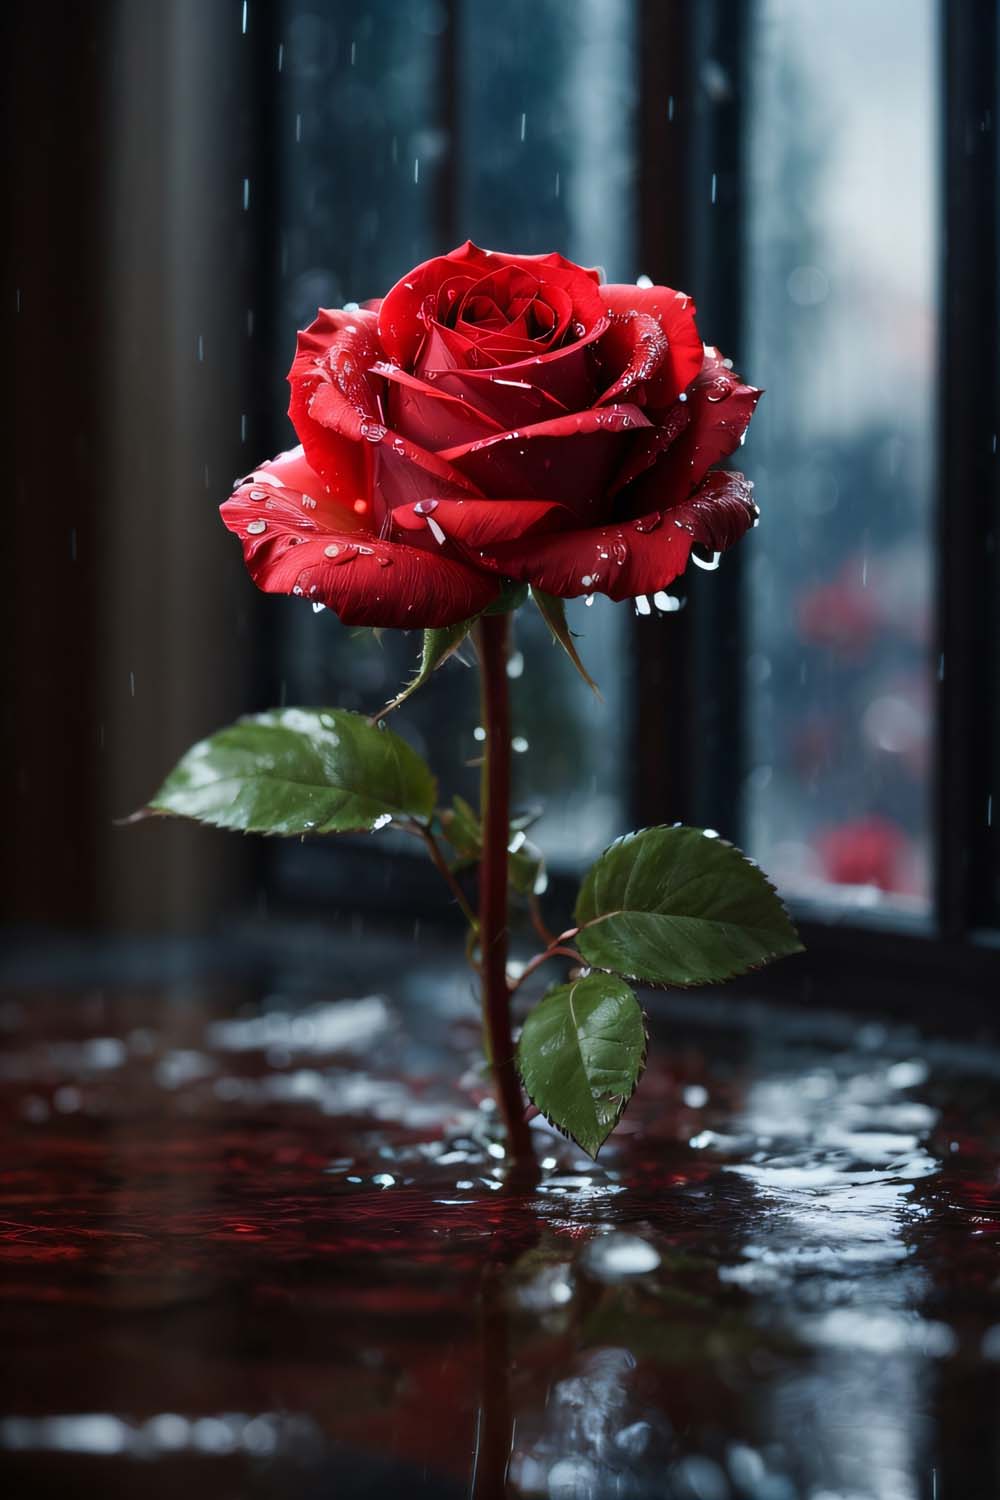 The Rose HD Wallpapers